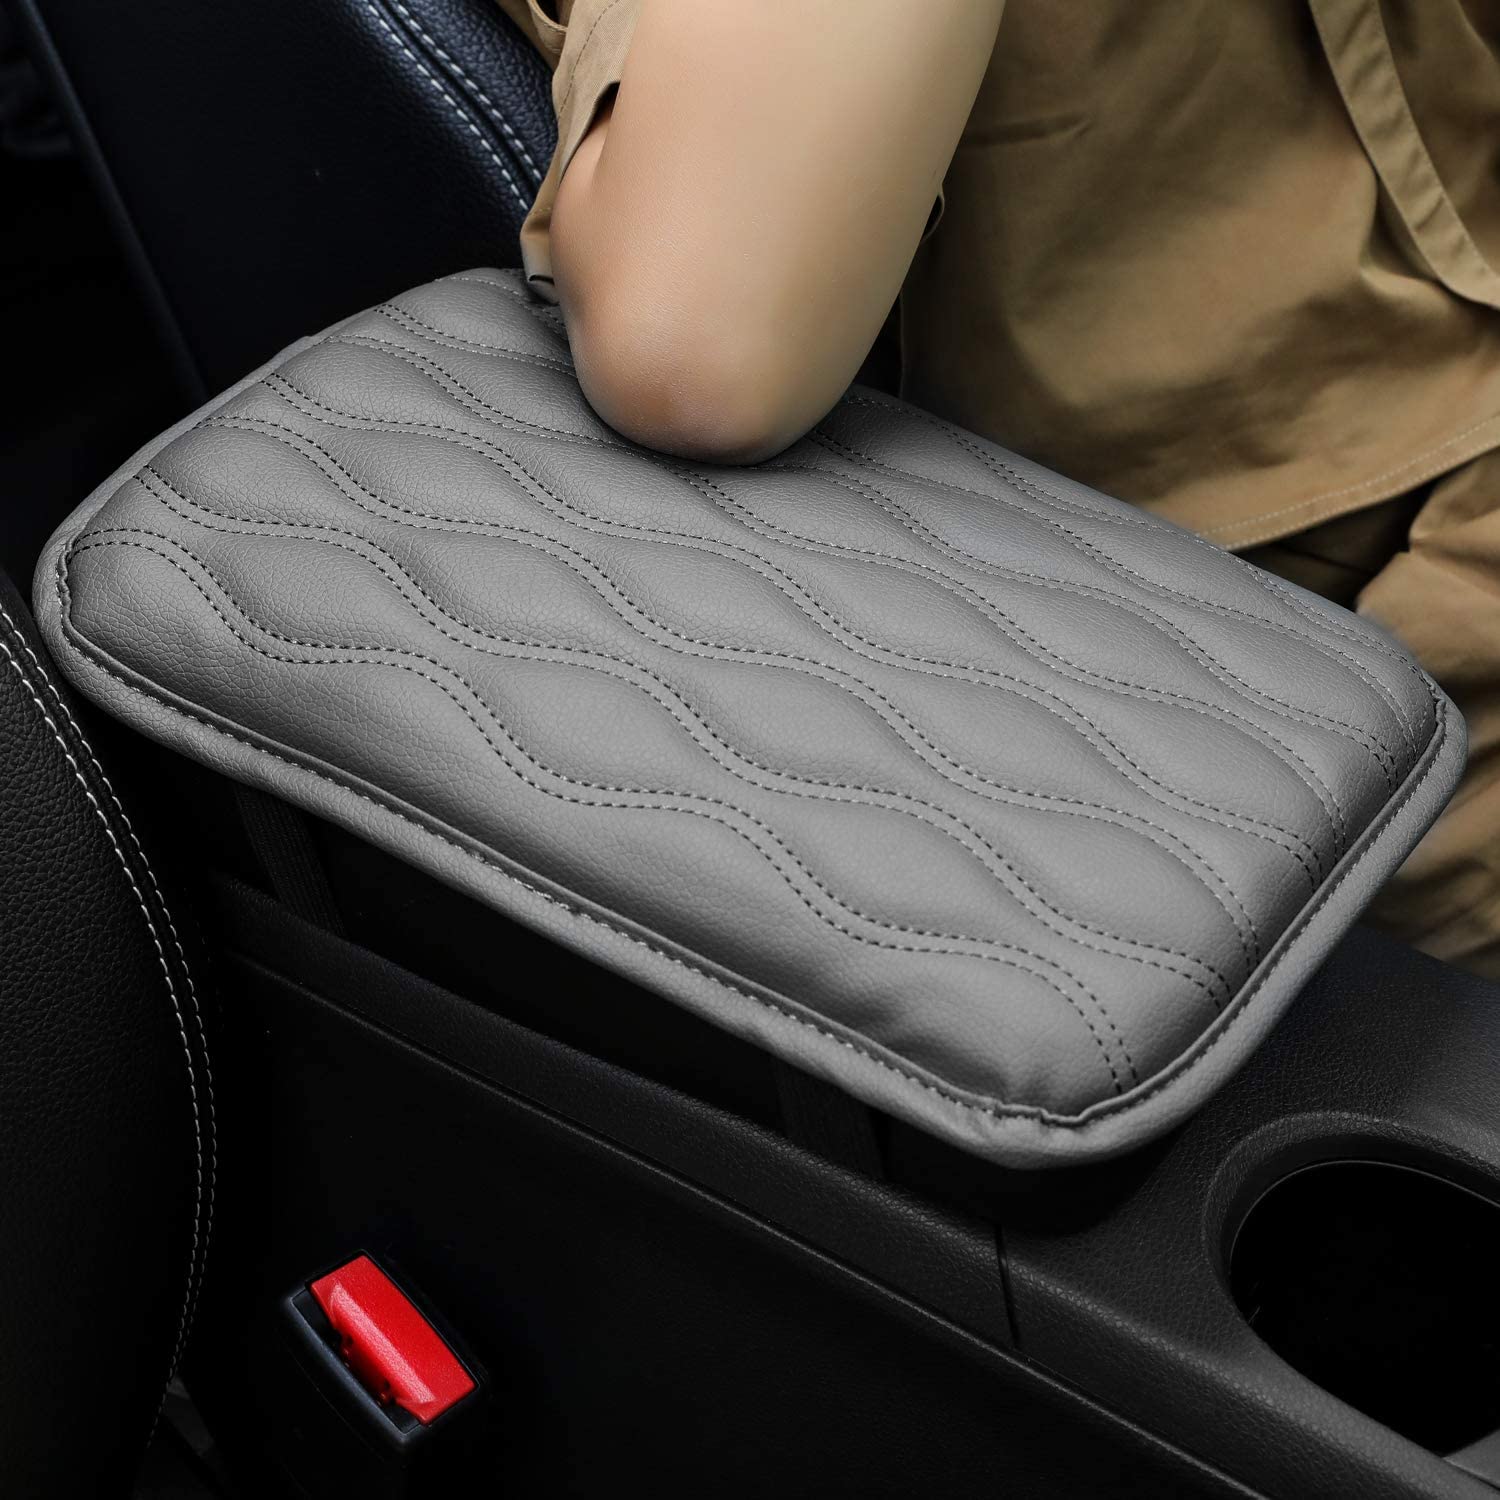 Universal Center Console Cover for Most Vehicle, SUV, Tr